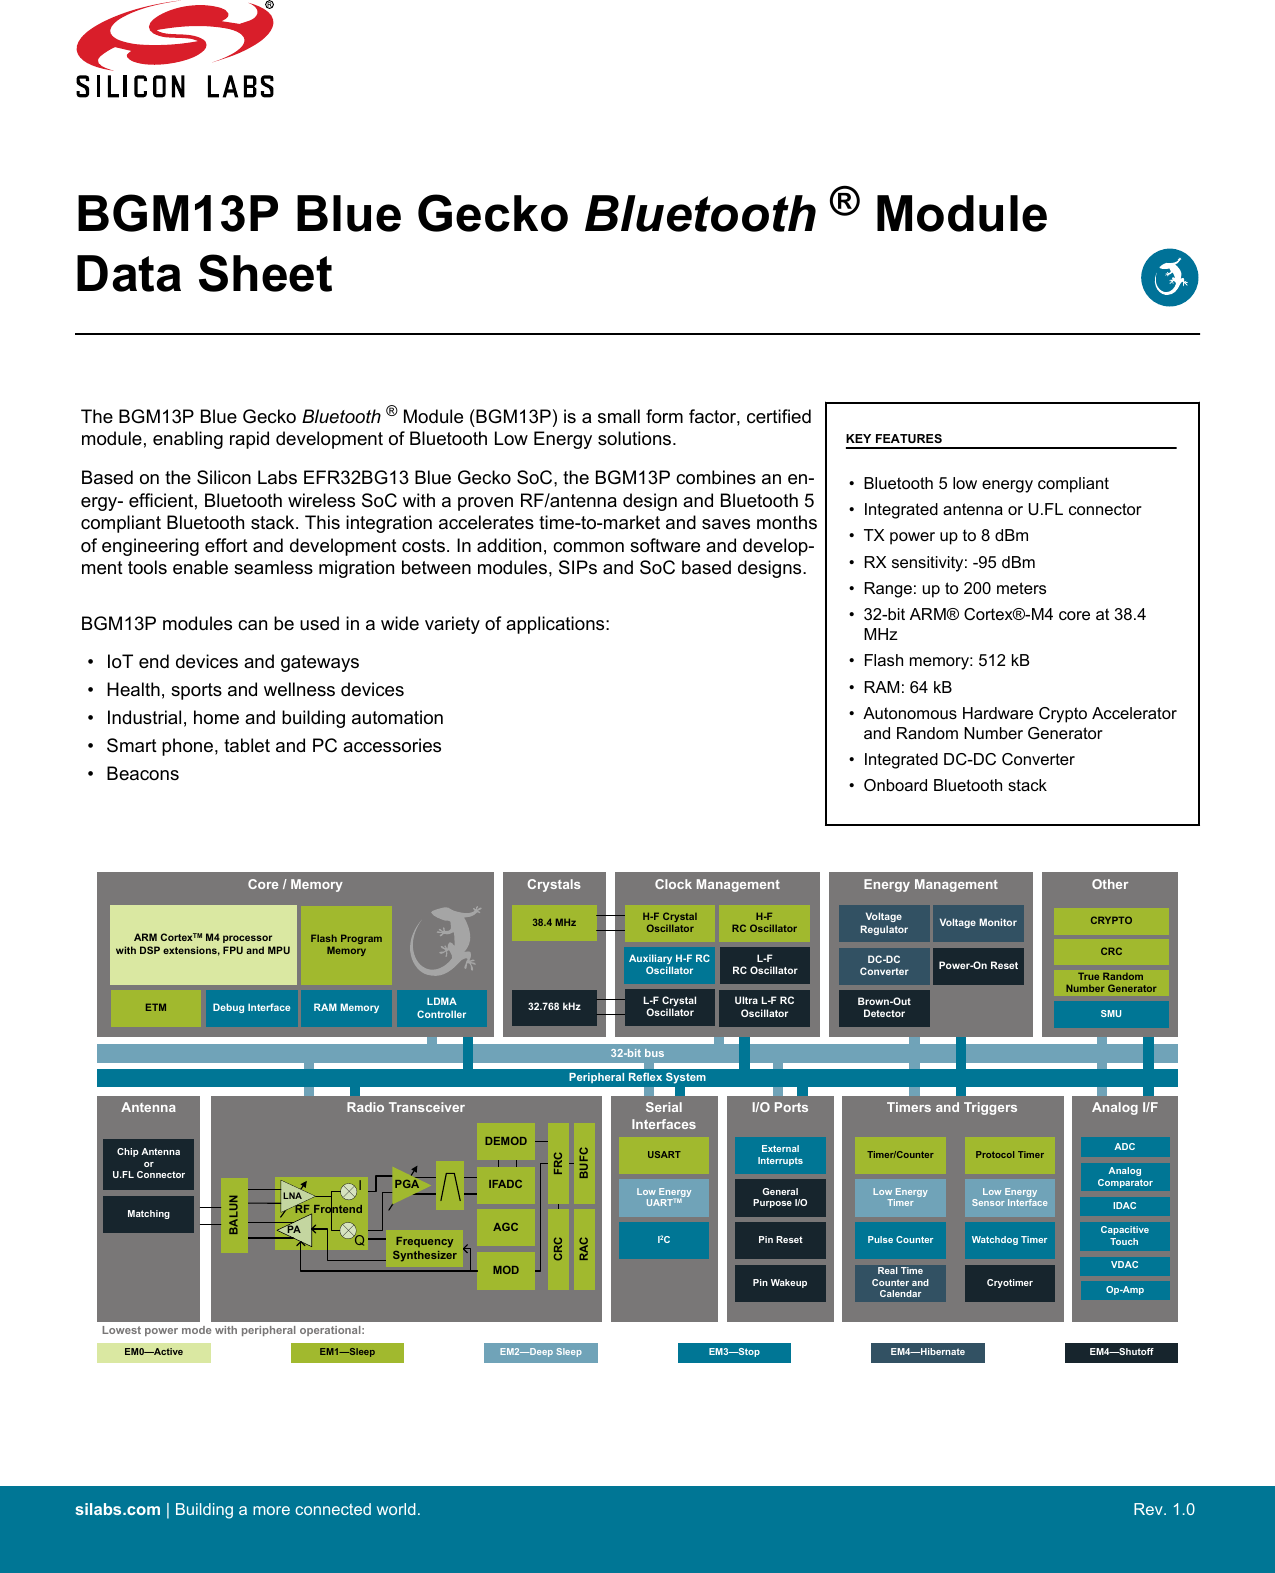 BGM13P Blue Gecko Bluetooth ® ModuleData SheetThe BGM13P Blue Gecko Bluetooth ® Module (BGM13P) is a small form factor, certifiedmodule, enabling rapid development of Bluetooth Low Energy solutions.Based on the Silicon Labs EFR32BG13 Blue Gecko SoC, the BGM13P combines an en-ergy- efficient, Bluetooth wireless SoC with a proven RF/antenna design and Bluetooth 5compliant Bluetooth stack. This integration accelerates time-to-market and saves monthsof engineering effort and development costs. In addition, common software and develop-ment tools enable seamless migration between modules, SIPs and SoC based designs.BGM13P modules can be used in a wide variety of applications:KEY FEATURES• Bluetooth 5 low energy compliant• Integrated antenna or U.FL connector• TX power up to 8 dBm• RX sensitivity: -95 dBm• Range: up to 200 meters• 32-bit ARM® Cortex®-M4 core at 38.4MHz• Flash memory: 512 kB• RAM: 64 kB• Autonomous Hardware Crypto Acceleratorand Random Number Generator• Integrated DC-DC Converter• Onboard Bluetooth stack• IoT end devices and gateways• Health, sports and wellness devices• Industrial, home and building automation• Smart phone, tablet and PC accessories• BeaconsAntenna Timers and Triggers32-bit busPeripheral Reflex SystemSerial InterfacesI/O Ports Analog I/FLowest power mode with peripheral operational:USARTLow Energy UARTTMI2CExternal InterruptsGeneral Purpose I/OPin ResetPin WakeupADCVDACAnalog ComparatorEM3—StopEM2—Deep SleepEM1—Sleep EM4—Hibernate EM4—ShutoffEM0—ActiveEnergy ManagementBrown-Out DetectorDC-DC ConverterVoltage Regulator Voltage MonitorPower-On ResetOtherCapacitive TouchOp-AmpIDACCRYPTOCRCTrue Random Number GeneratorSMUCore / MemoryARM CortexTM M4 processorwith DSP extensions, FPU and MPUETM Debug Interface RAM Memory LDMA ControllerFlash Program MemoryReal Time Counter and CalendarCryotimerTimer/CounterLow Energy TimerPulse Counter Watchdog TimerProtocol TimerLow Energy Sensor InterfaceRadio TransceiverDEMODAGCIFADCCRCBUFCMODFRCRACIQRF FrontendLNAPA Frequency SynthesizerPGABALUNChip AntennaorU.FL ConnectorMatchingCrystals38.4 MHz32.768 kHzClock ManagementL-FRC OscillatorH-FRC OscillatorAuxiliary H-F RC OscillatorUltra L-F RC OscillatorL-F Crystal OscillatorH-F Crystal Oscillatorsilabs.com | Building a more connected world. Rev. 1.0 